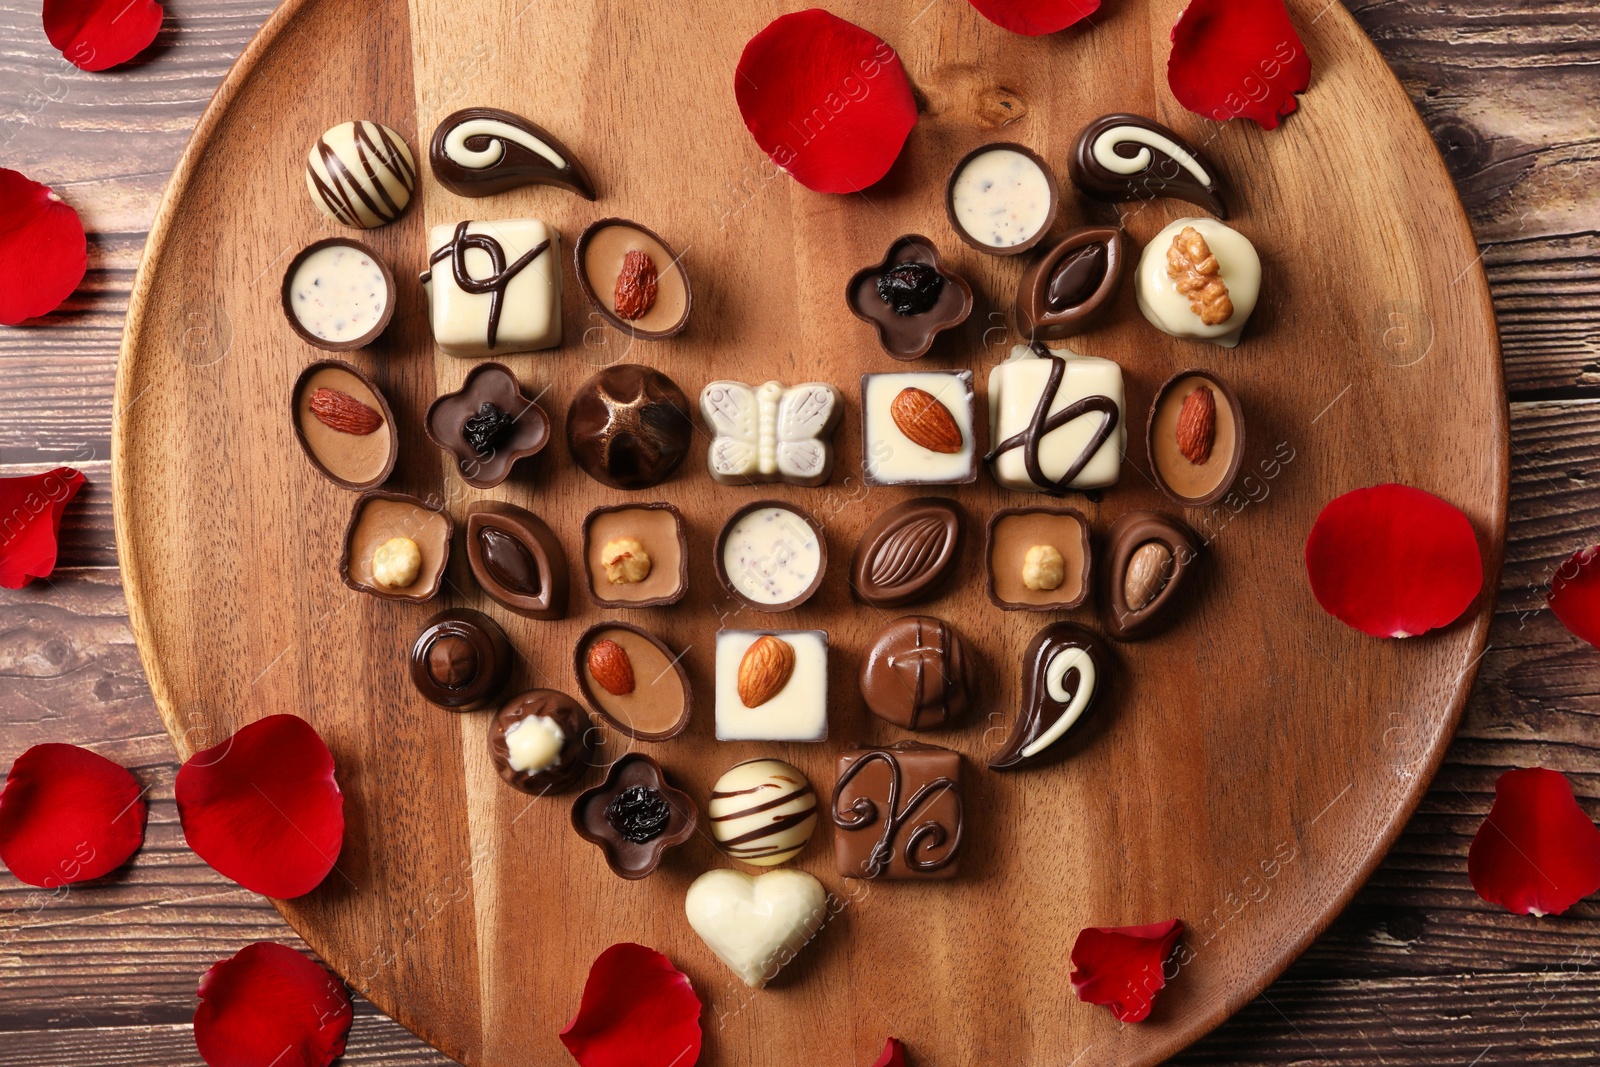 Photo of Heart made with delicious chocolate candies and rose petals on wooden table, top view